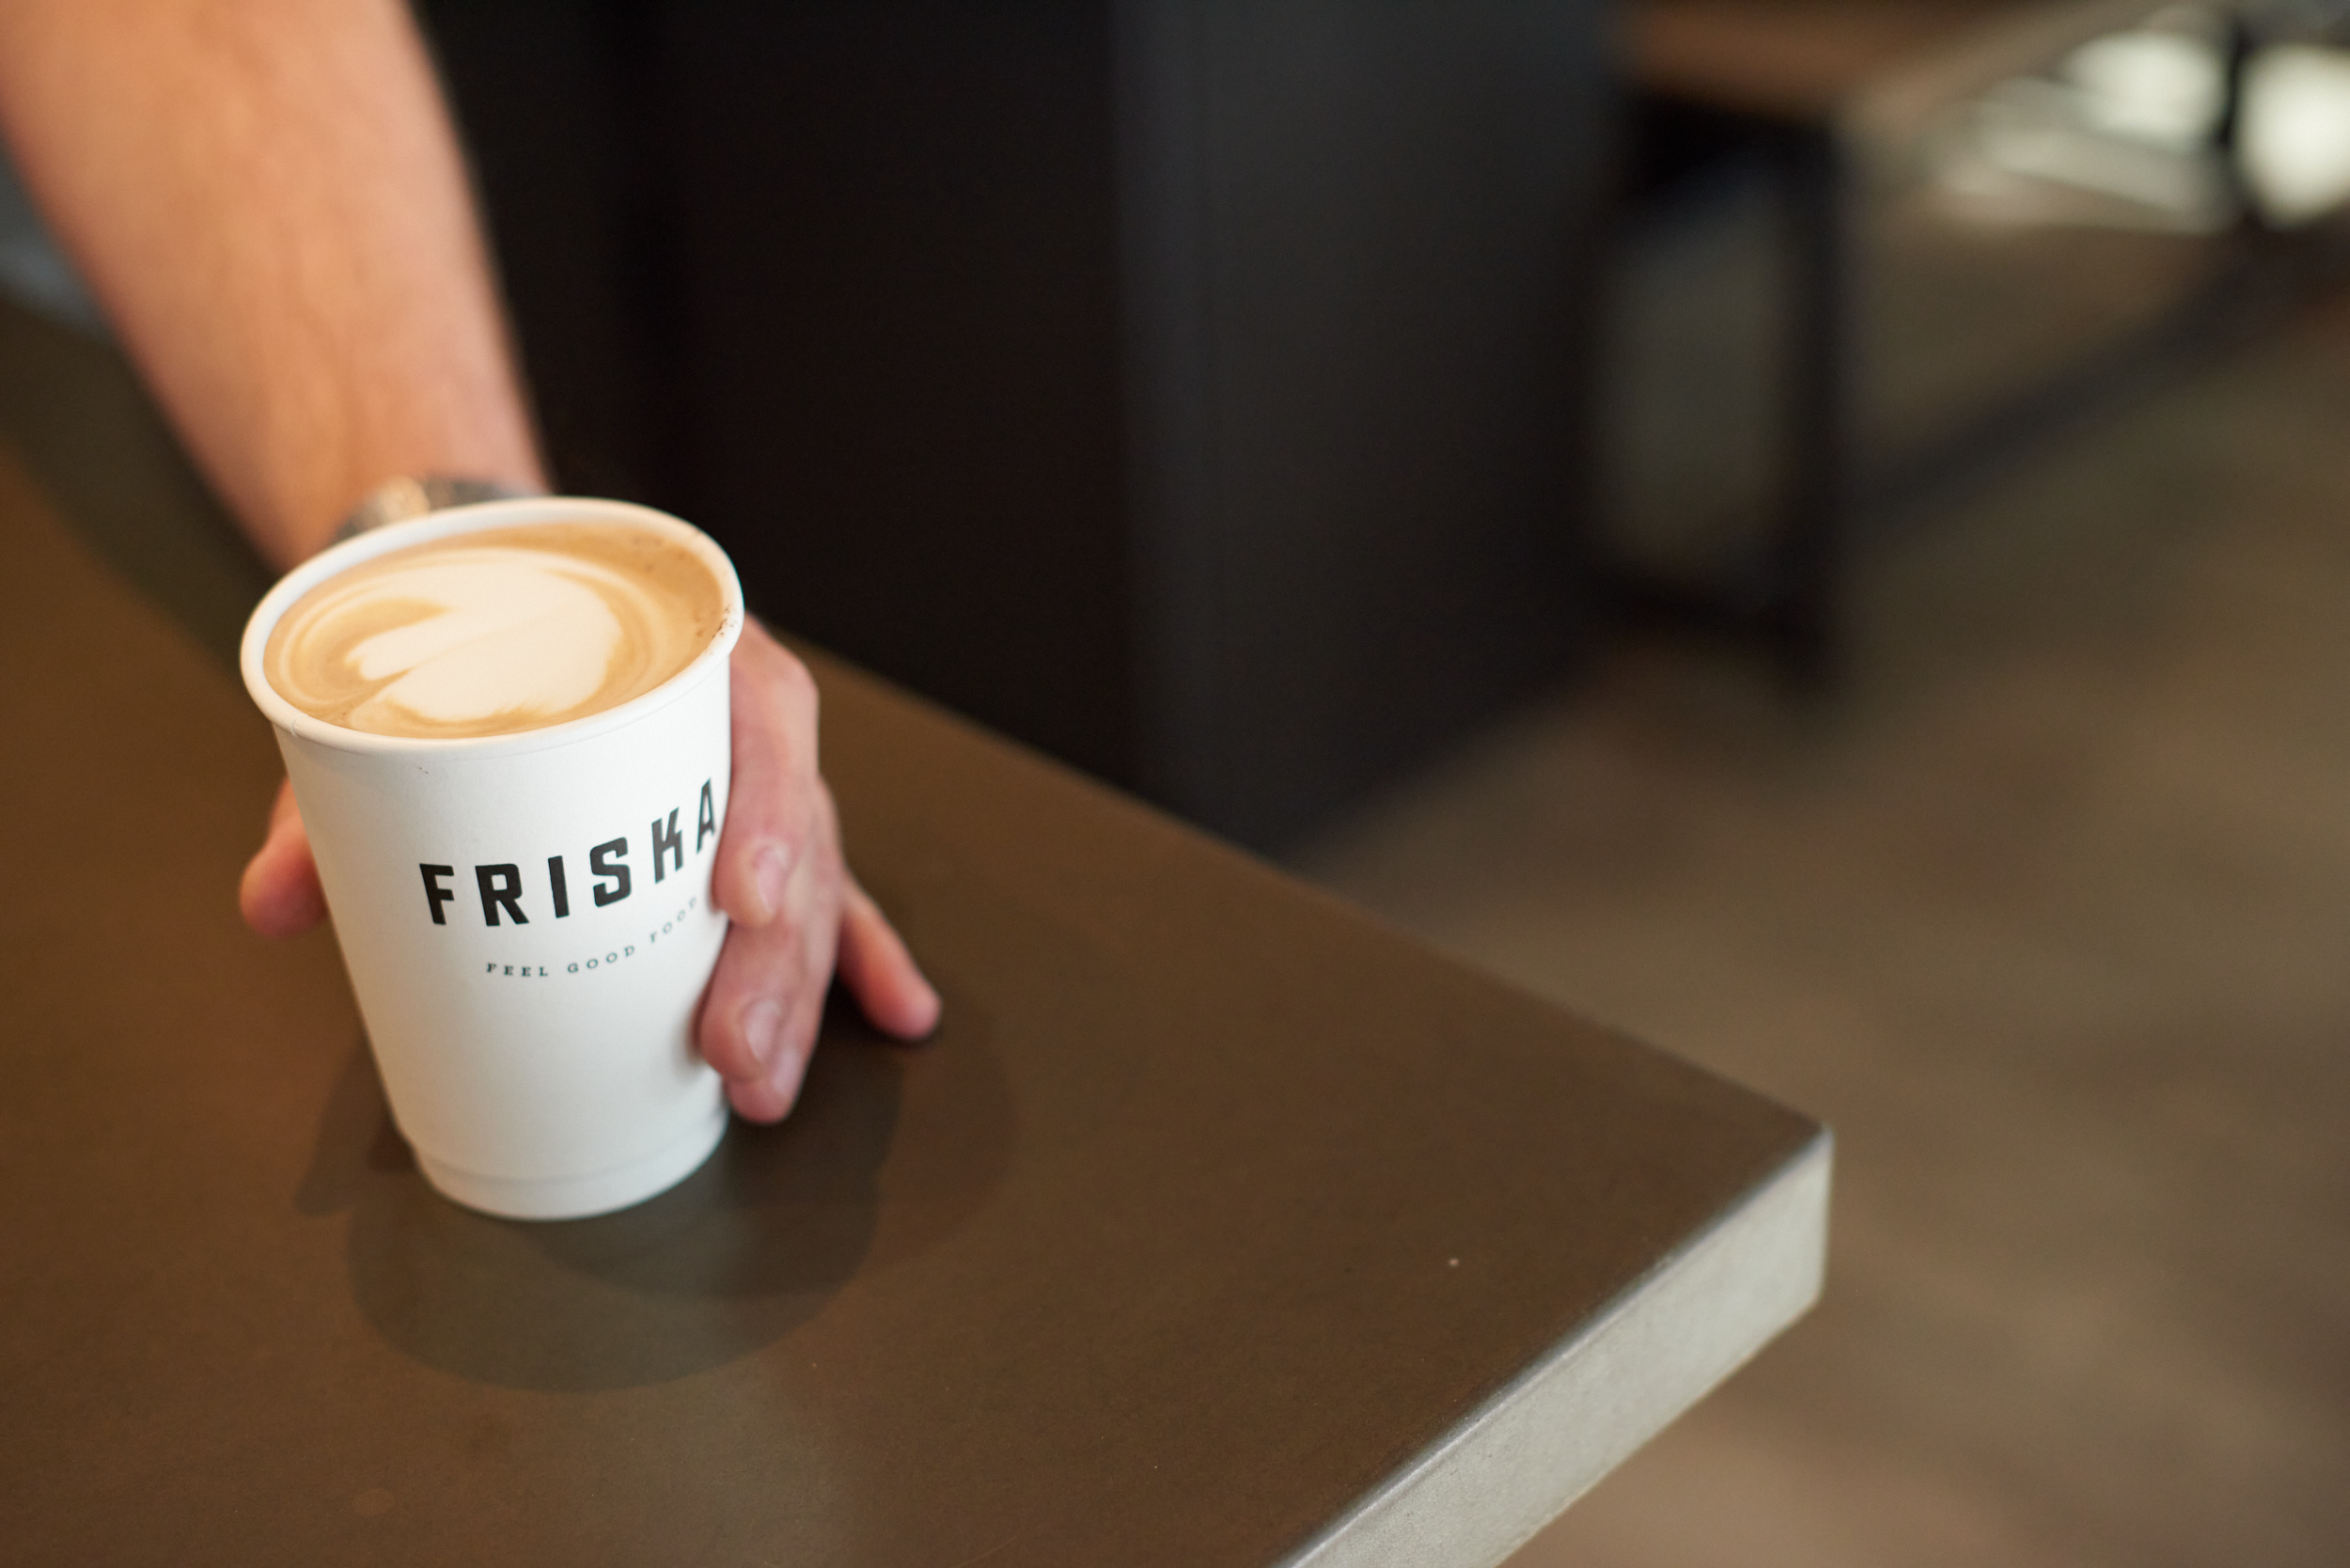 A CLOSE-UP OF A COFFEE CUP WITH A FRISKA LOGO EMBEDDED